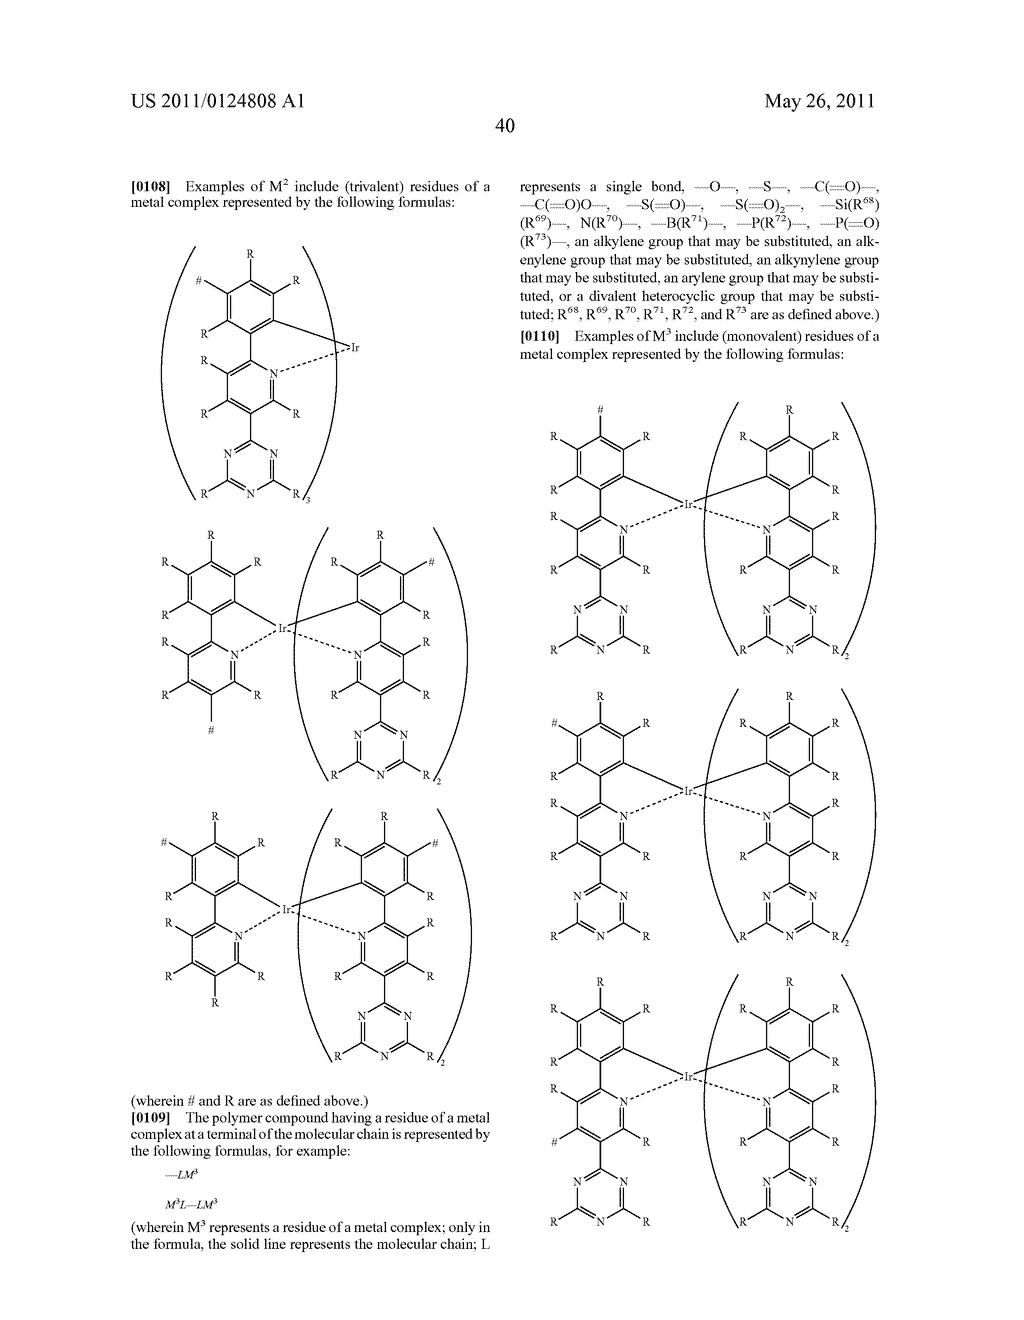 POLYMERIC COMPOUND CONTAINING METAL COMPLEX RESIDUE AND ELEMENT COMPRISING SAME - diagram, schematic, and image 41